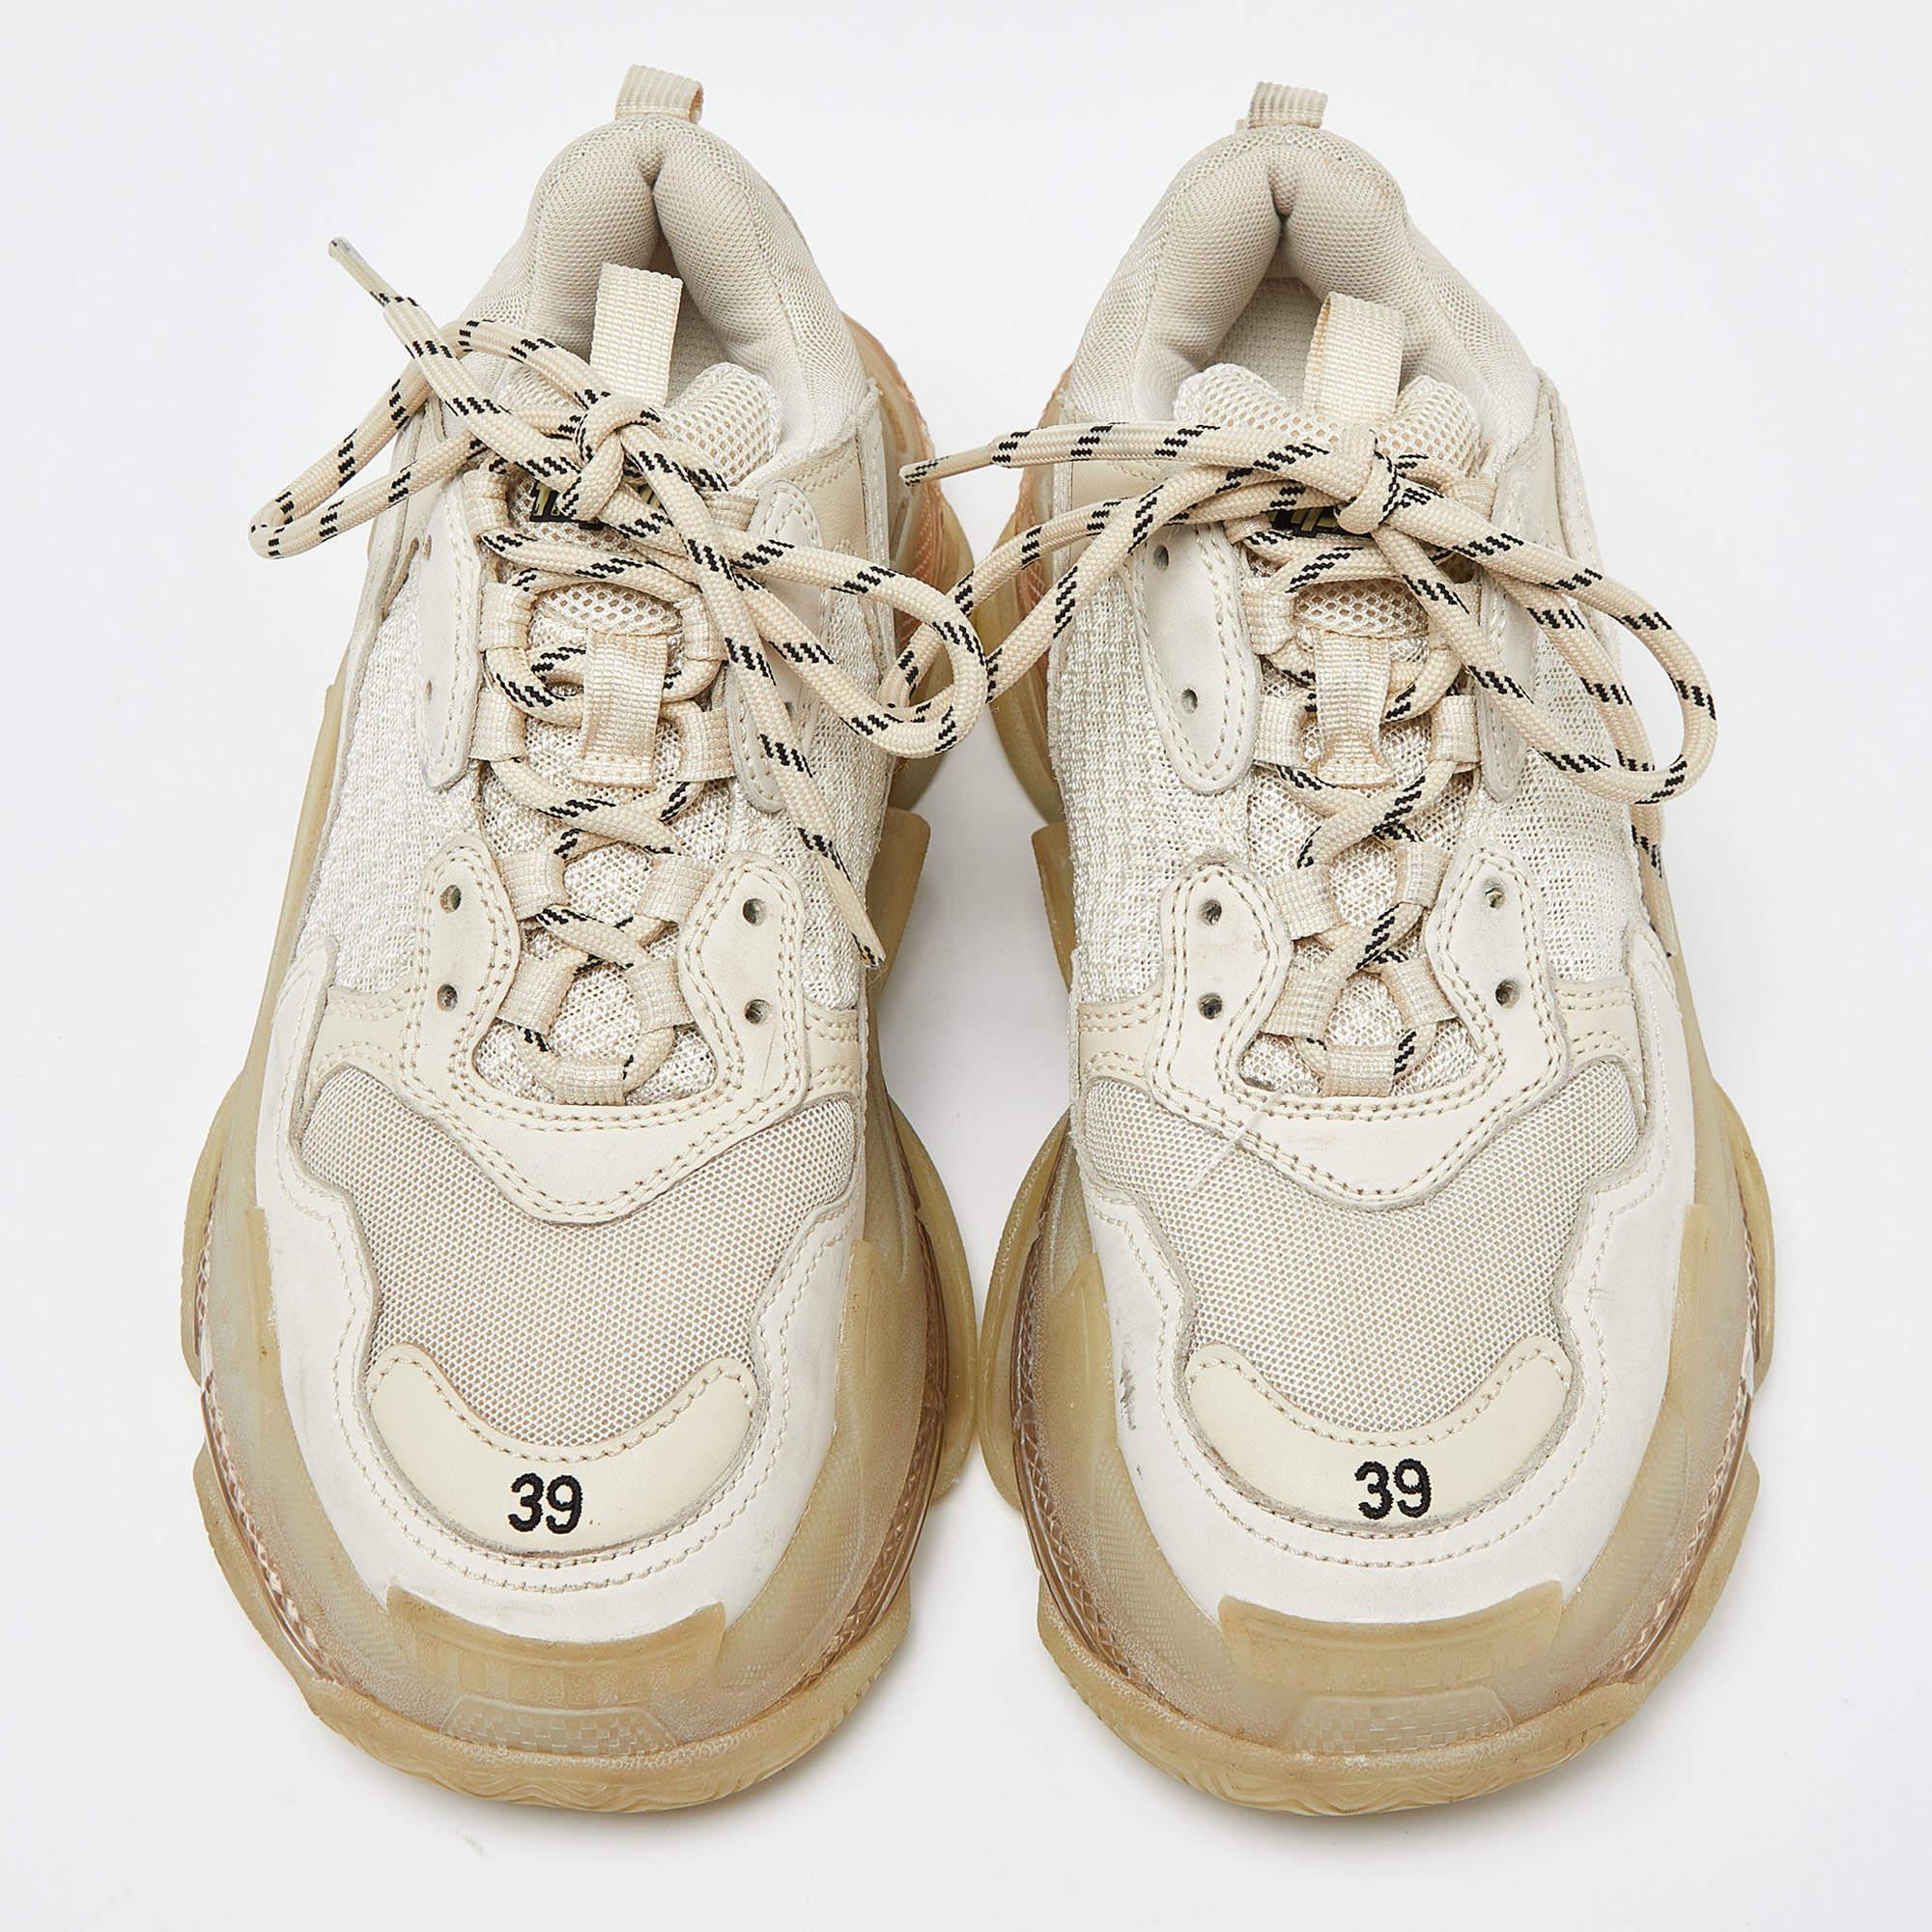 Women's Balenciaga Cream Leather and Mesh Triple S Clear Sole Sneakers Size 39 For Sale